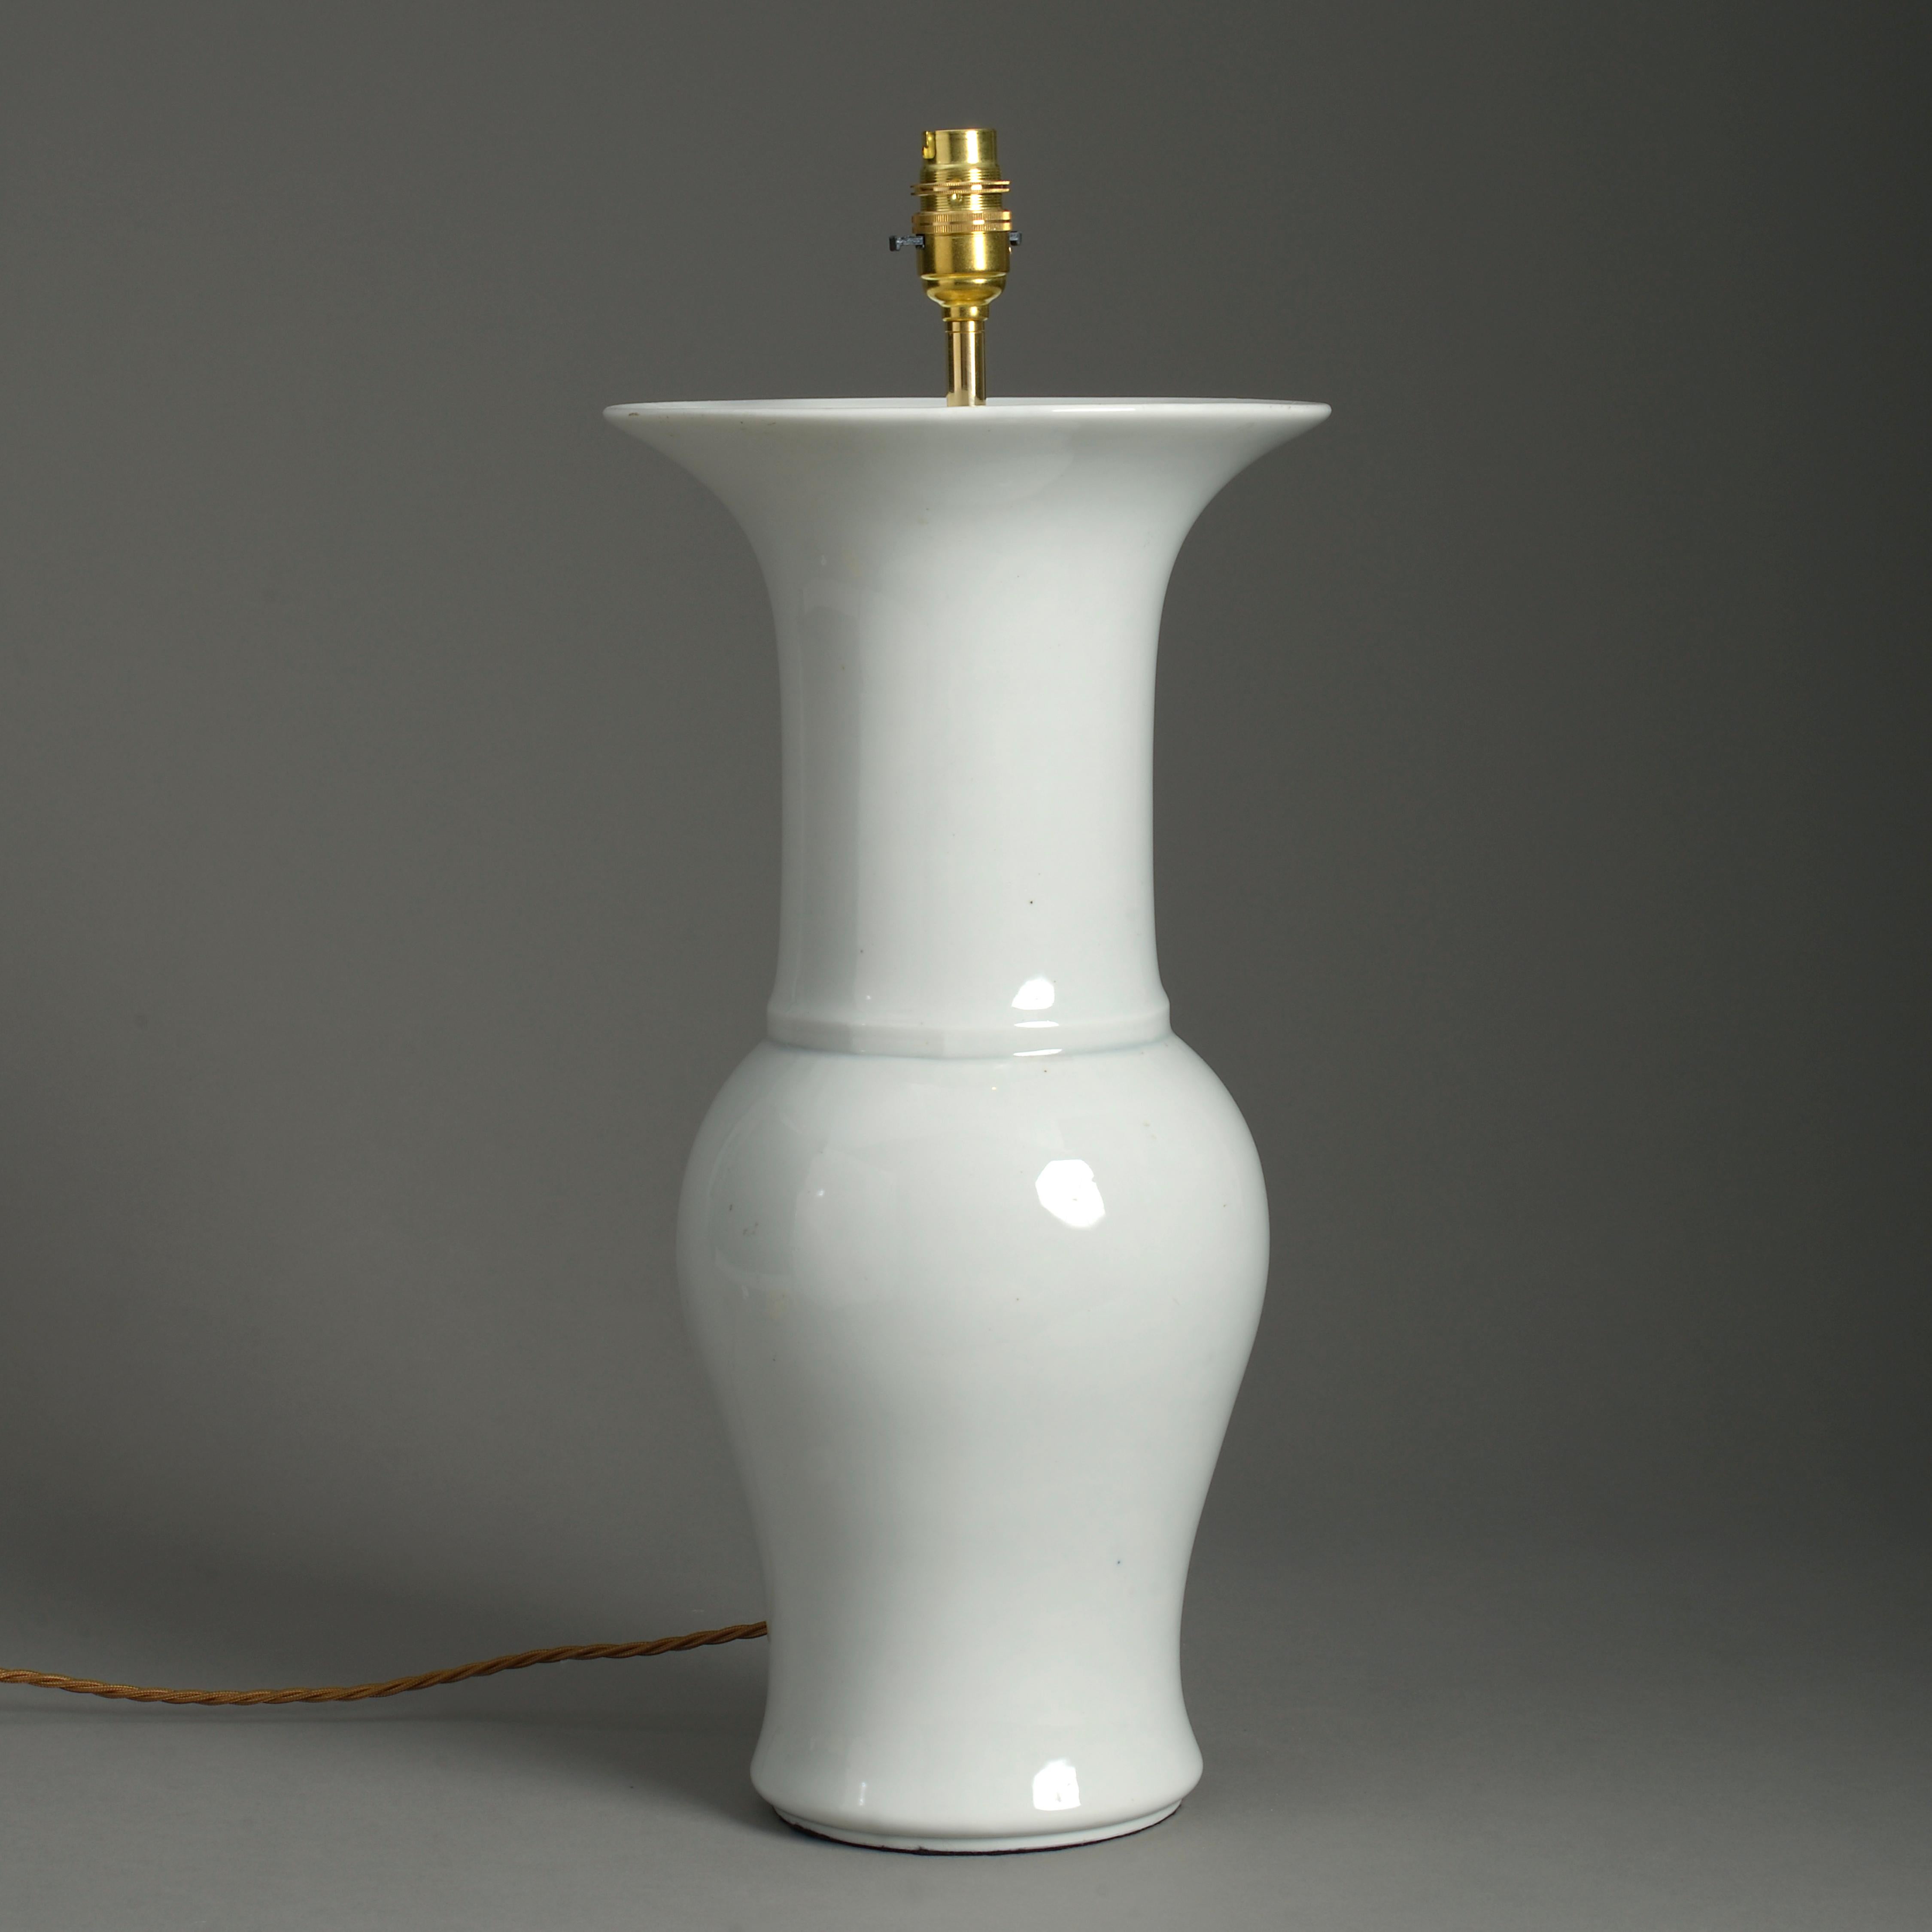 An early 20th century white porcelain sleeve vase, the trumpet neck above a baluster body. Now wired as a table lamp.

Dimensions refer to height of vase and base only.

Wired and tested for UK standards. This piece can be re-wired for US, EU